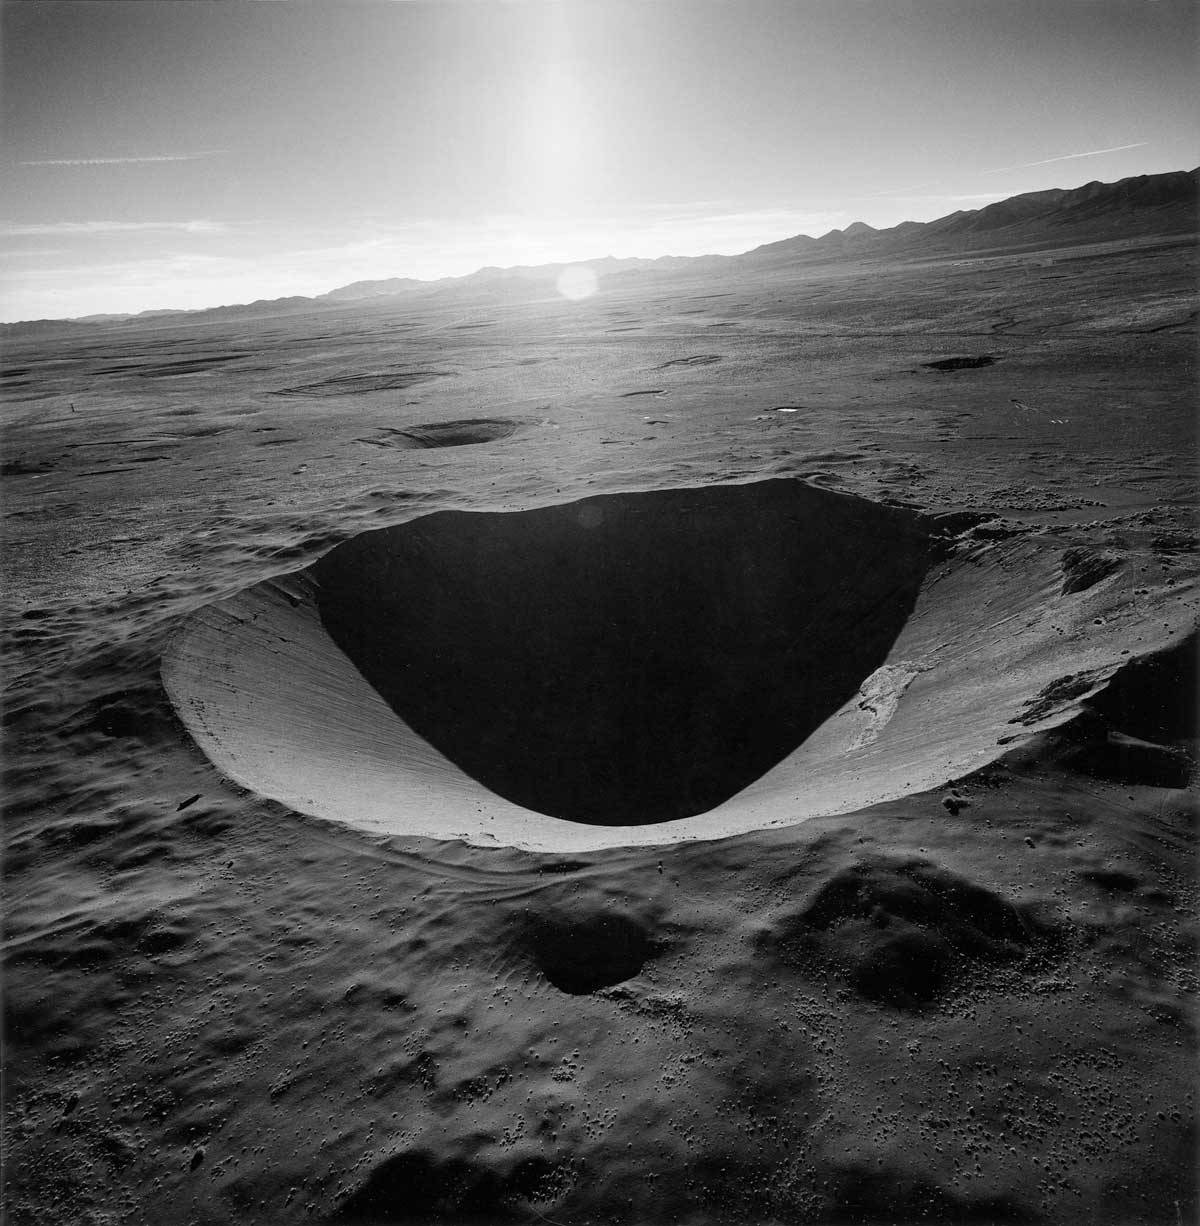 Emmet Gowin, SEDAN CRATER, NORTHERN END OF YUCCA FLAT, NEVADA TEST SITE, 1996. Part of Operation Plowshare, the Sedan test was intended to develop peaceful uses for nuclear weapons. On July 6, 1962, the Sedan device exploded with a yield of 104 kilotons, similar to the warhead of the Minuteman I missile. Sedan was buried only 635 feet below the surface. The blast produced a crater approximately 1,200 feet wide and 330 feet deep, displacing 12 million tons of earth and releasing high levels of radiation into the atmosphere. (From THE NEVADA TEST SITE by Emmet Gowin, with a foreword by Robert Adams, Princeton University Press, 2019.)